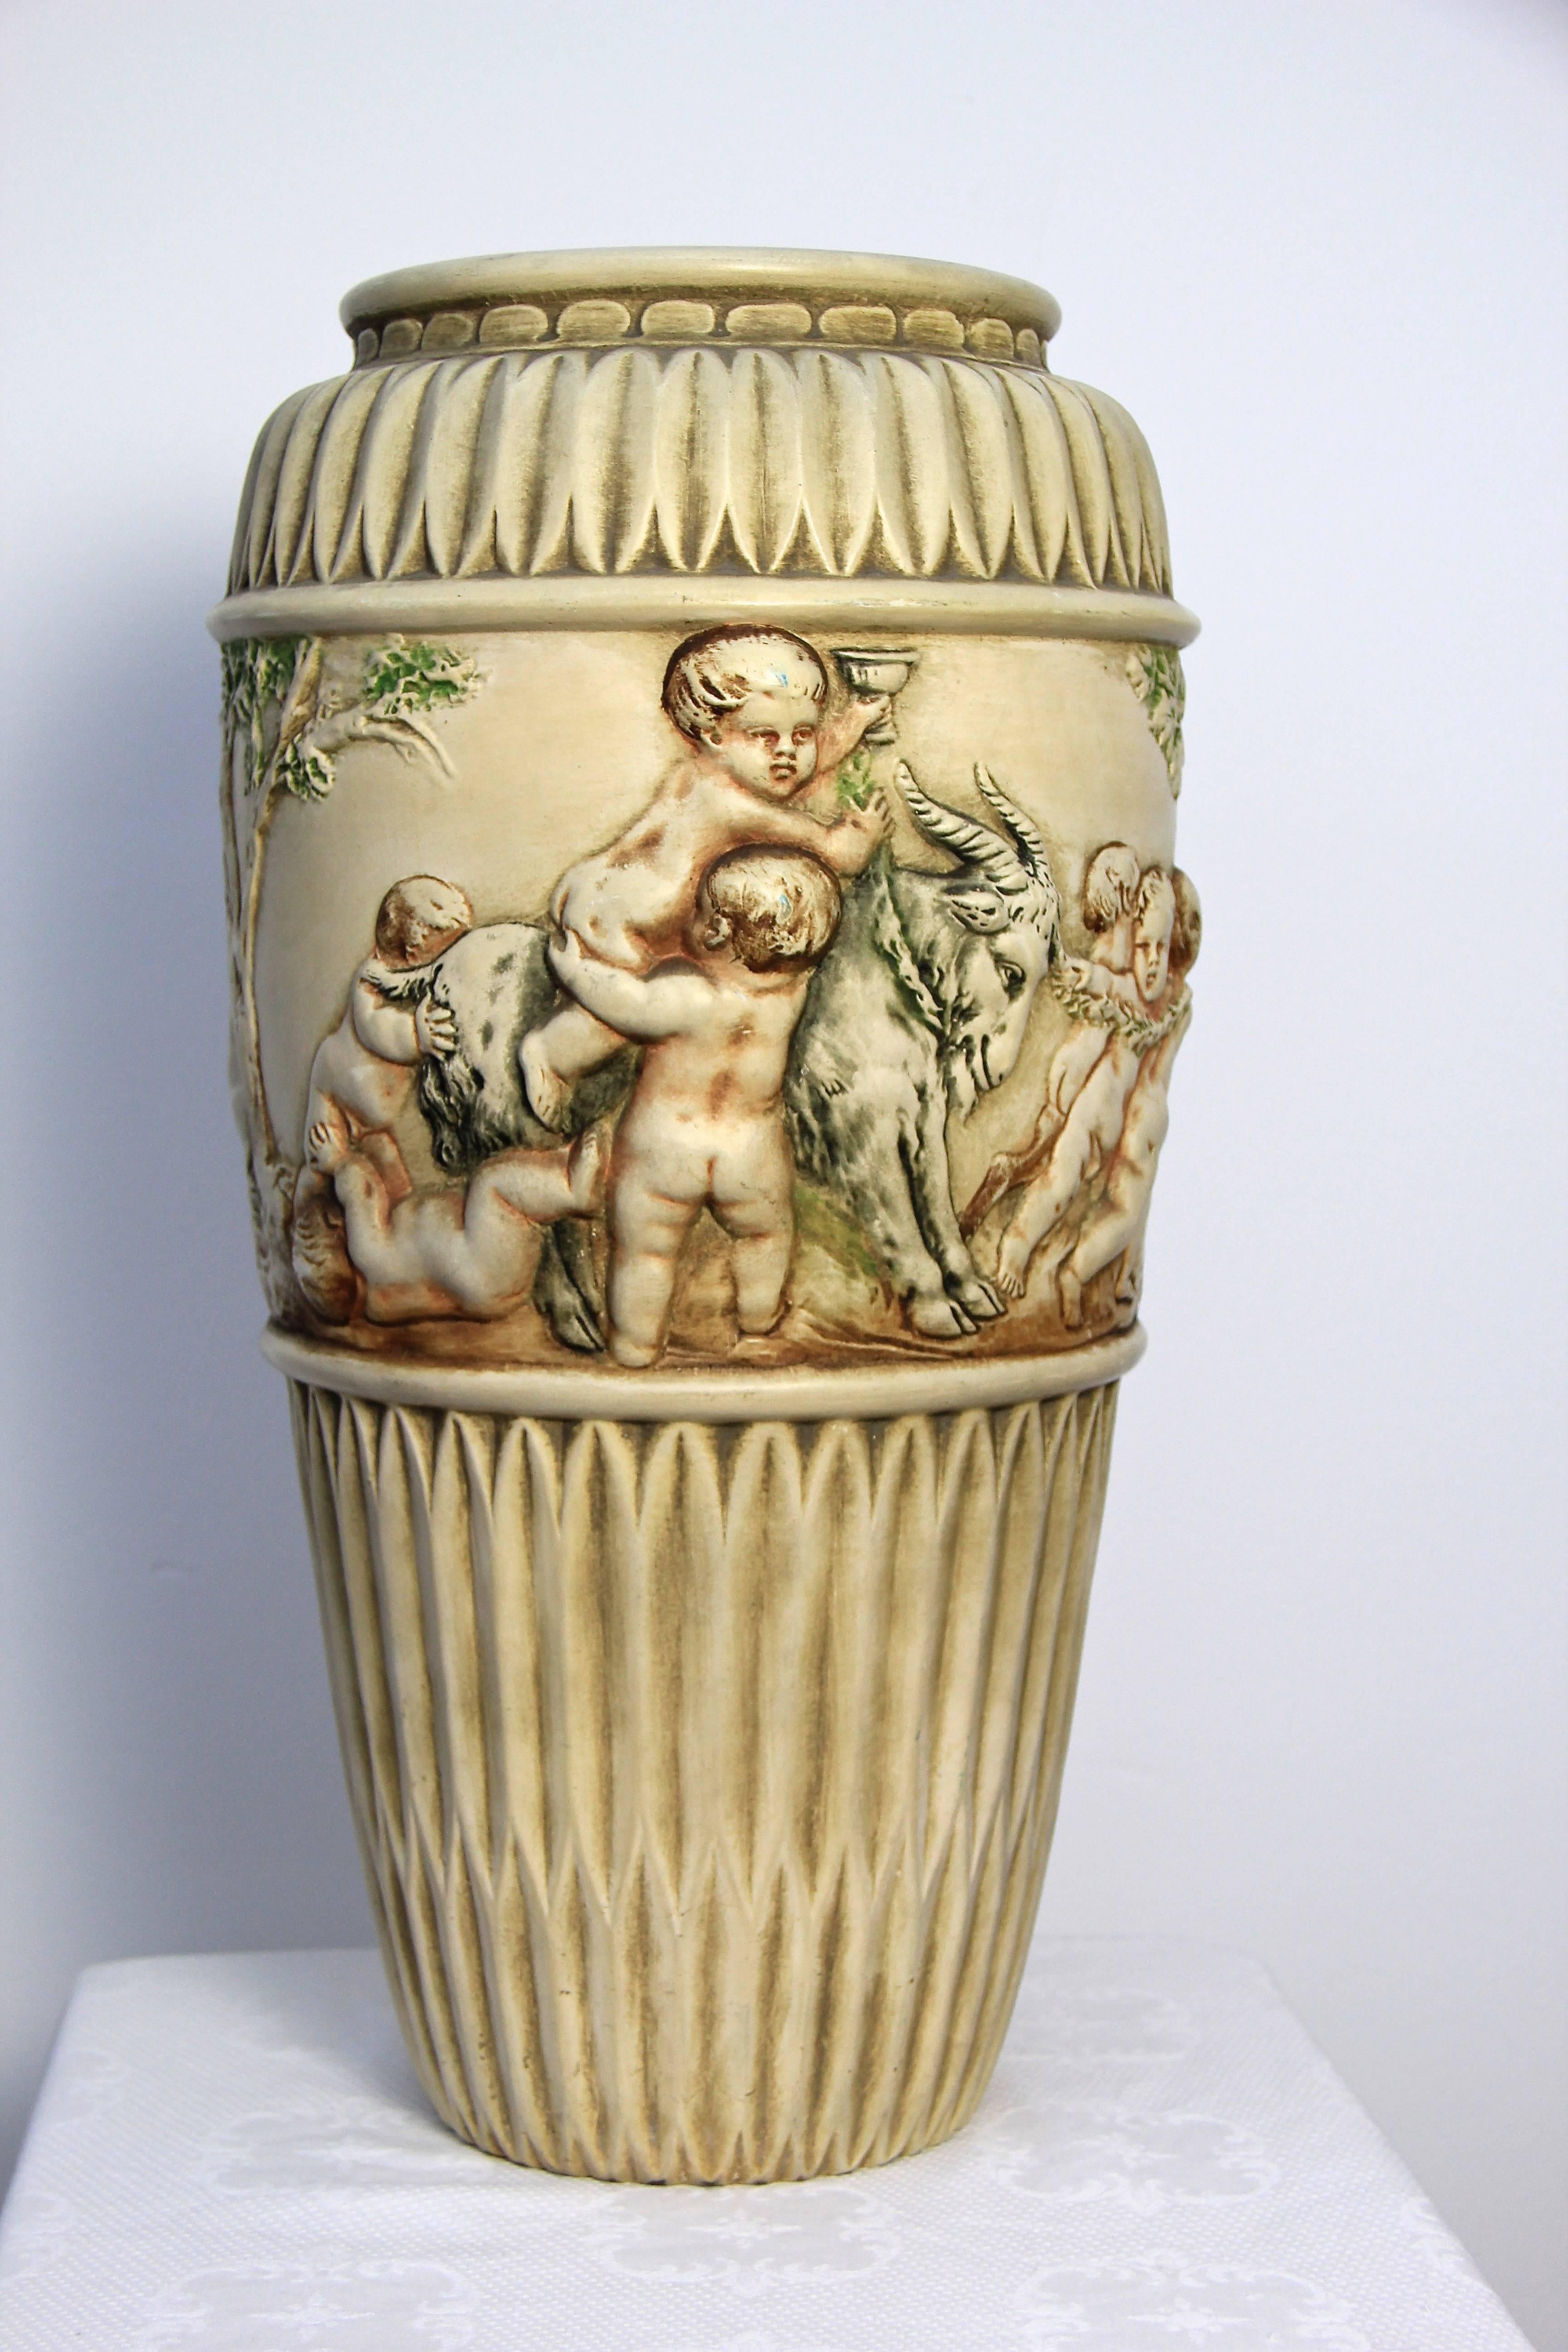 Have a look at this timeless ceramic vase from the Johann Maresch manufacture, a famous ceramic company in the old danube monarchy - from Bohemia (now Czech republic).
This piece shows a wonderful handpainted ongoing relief work with playing kids,